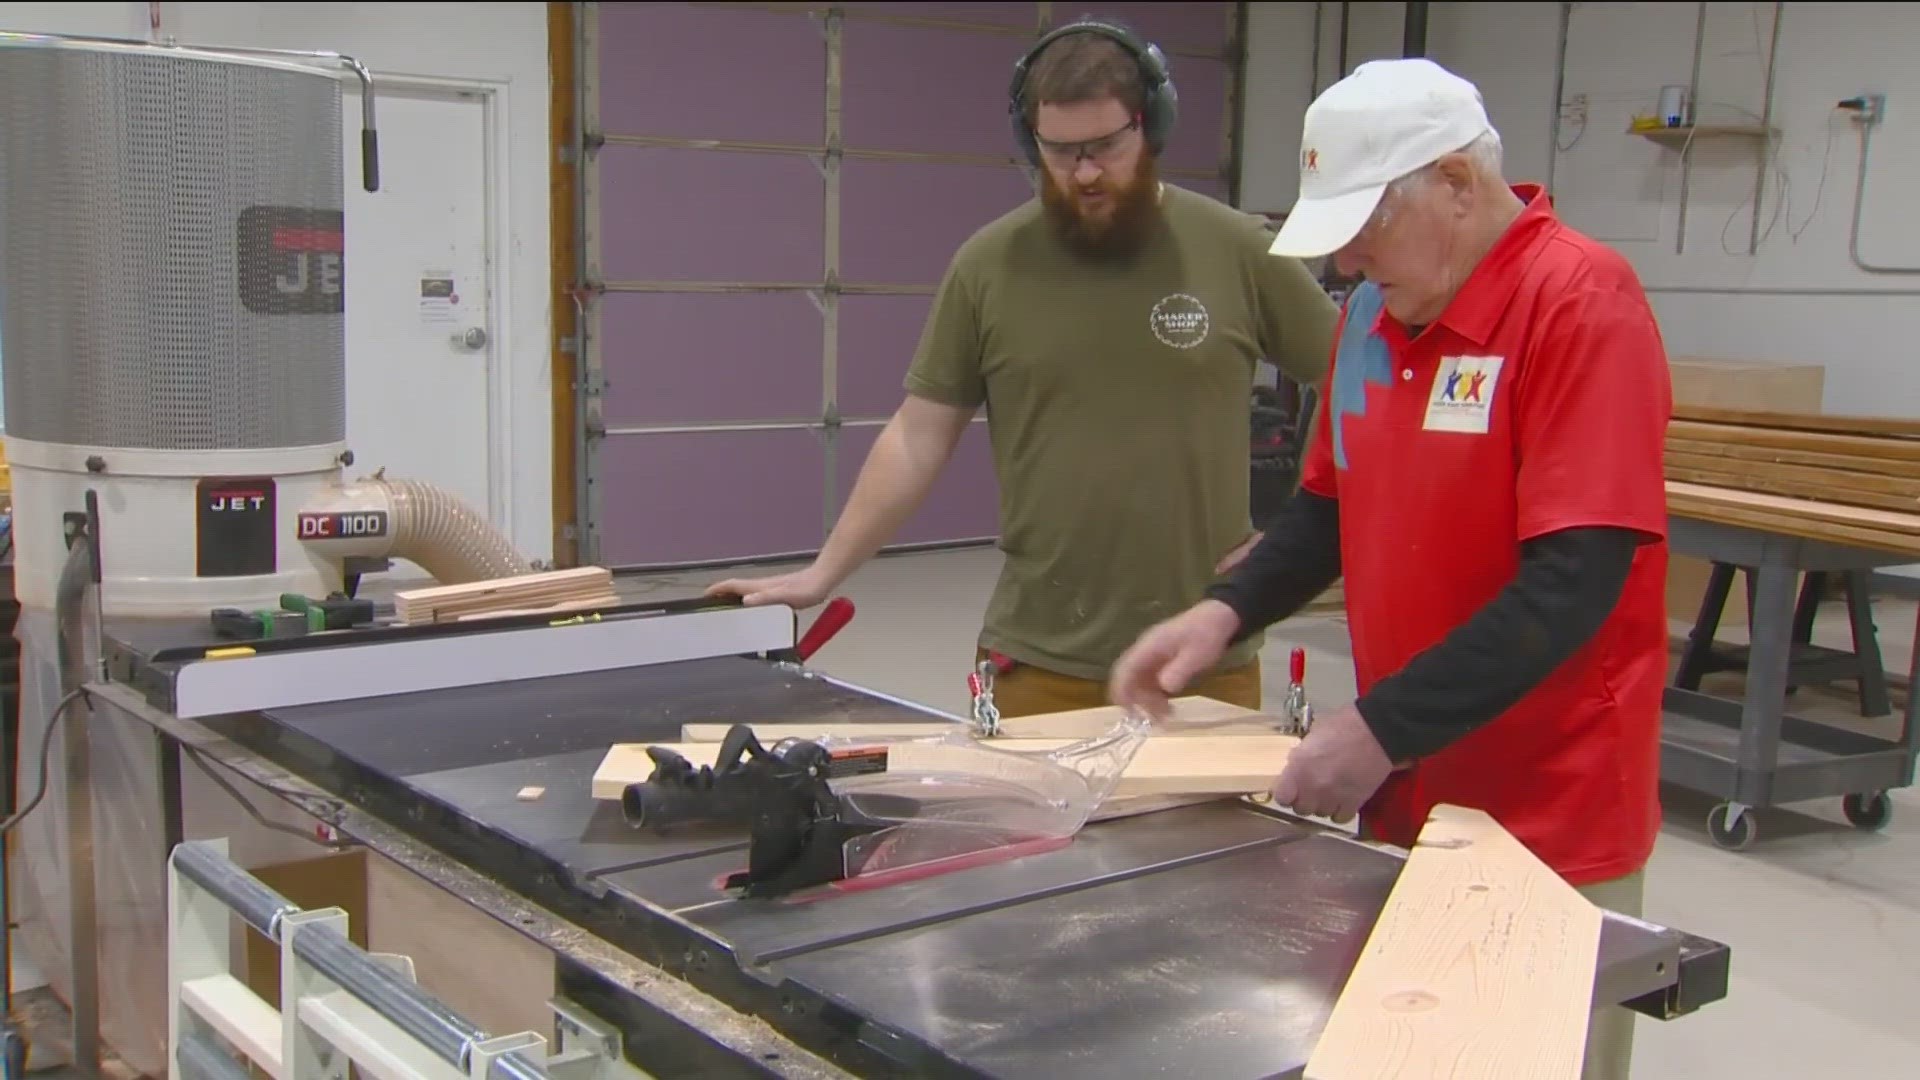 The organization hopes to teach children how to build furniture in an effort to transition them out of the foster care system.